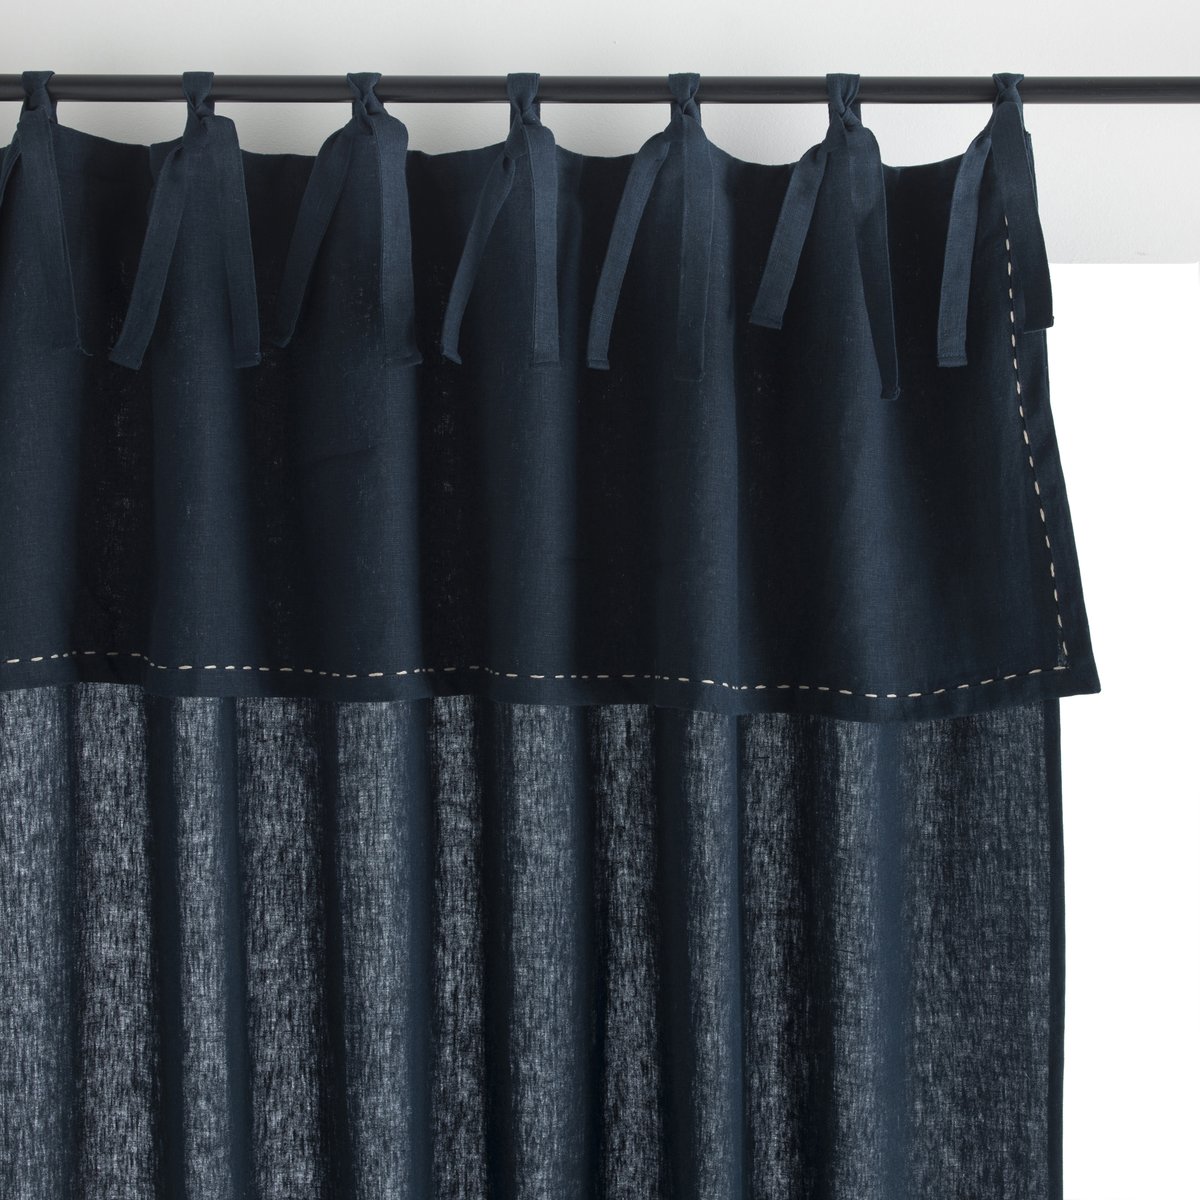 Image of Bogotti Single Washed Linen Curtain with Tie-Top